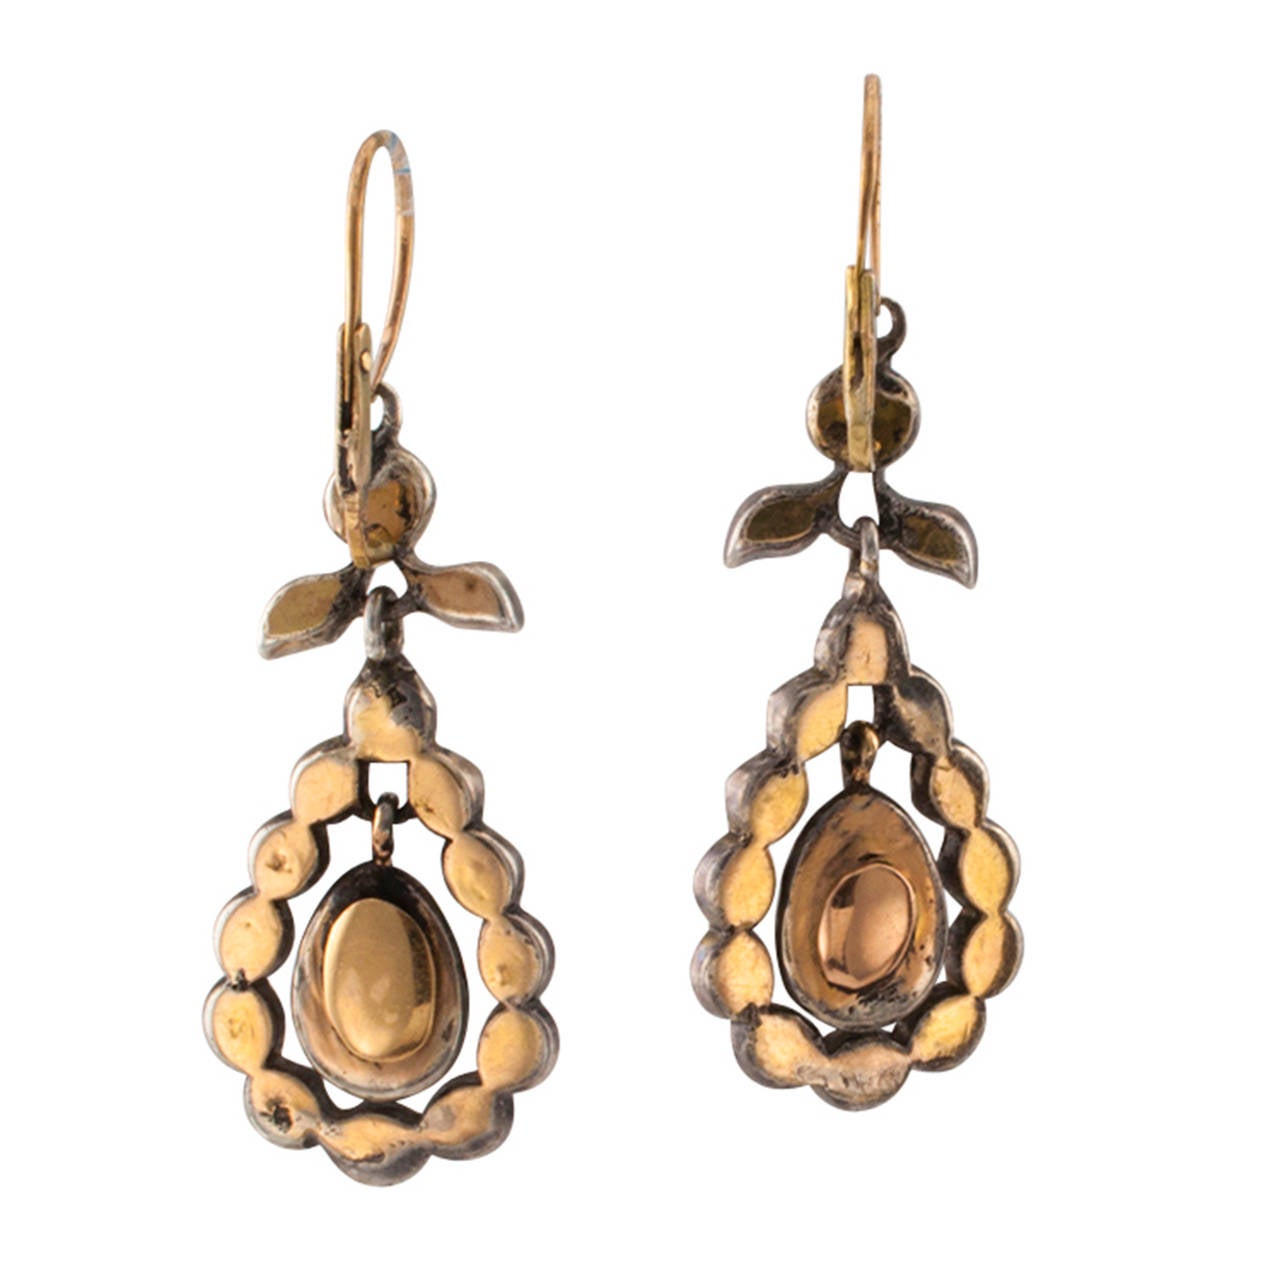 Antique Georgian Diamond Pendant Earrings

The articulated designs feature foliate inspired surmounts with pendant teardrop-shapes, set throughout with rose-cut diamonds, crafted in silver and  15 karat gold, the hinged wire backs open from the